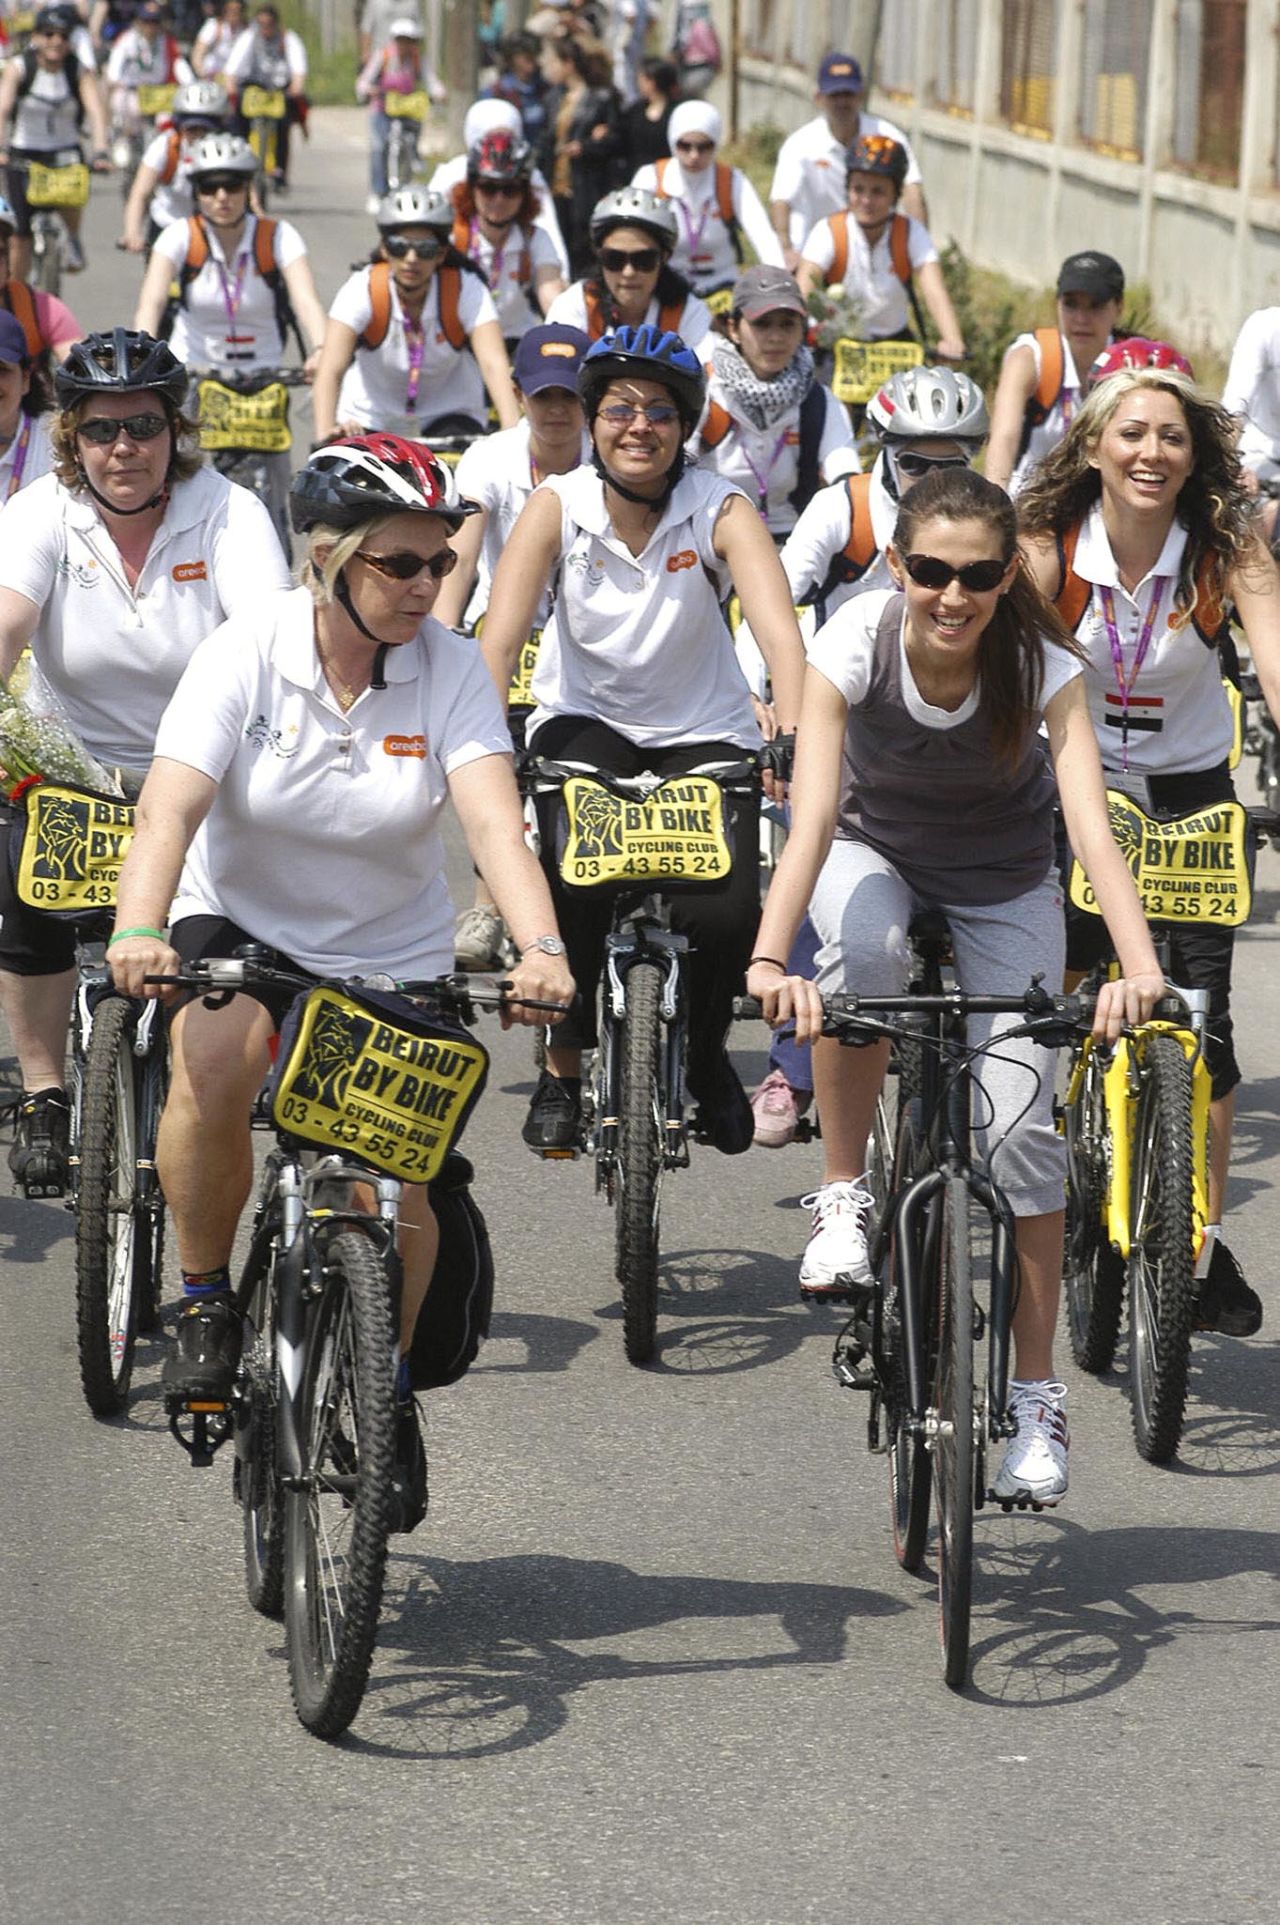 In a ride for peace, Asma al-Assad, right, leads a pack of female bicyclists in the Ras Shamra area of Latakia in Syria on April 8, 2007.